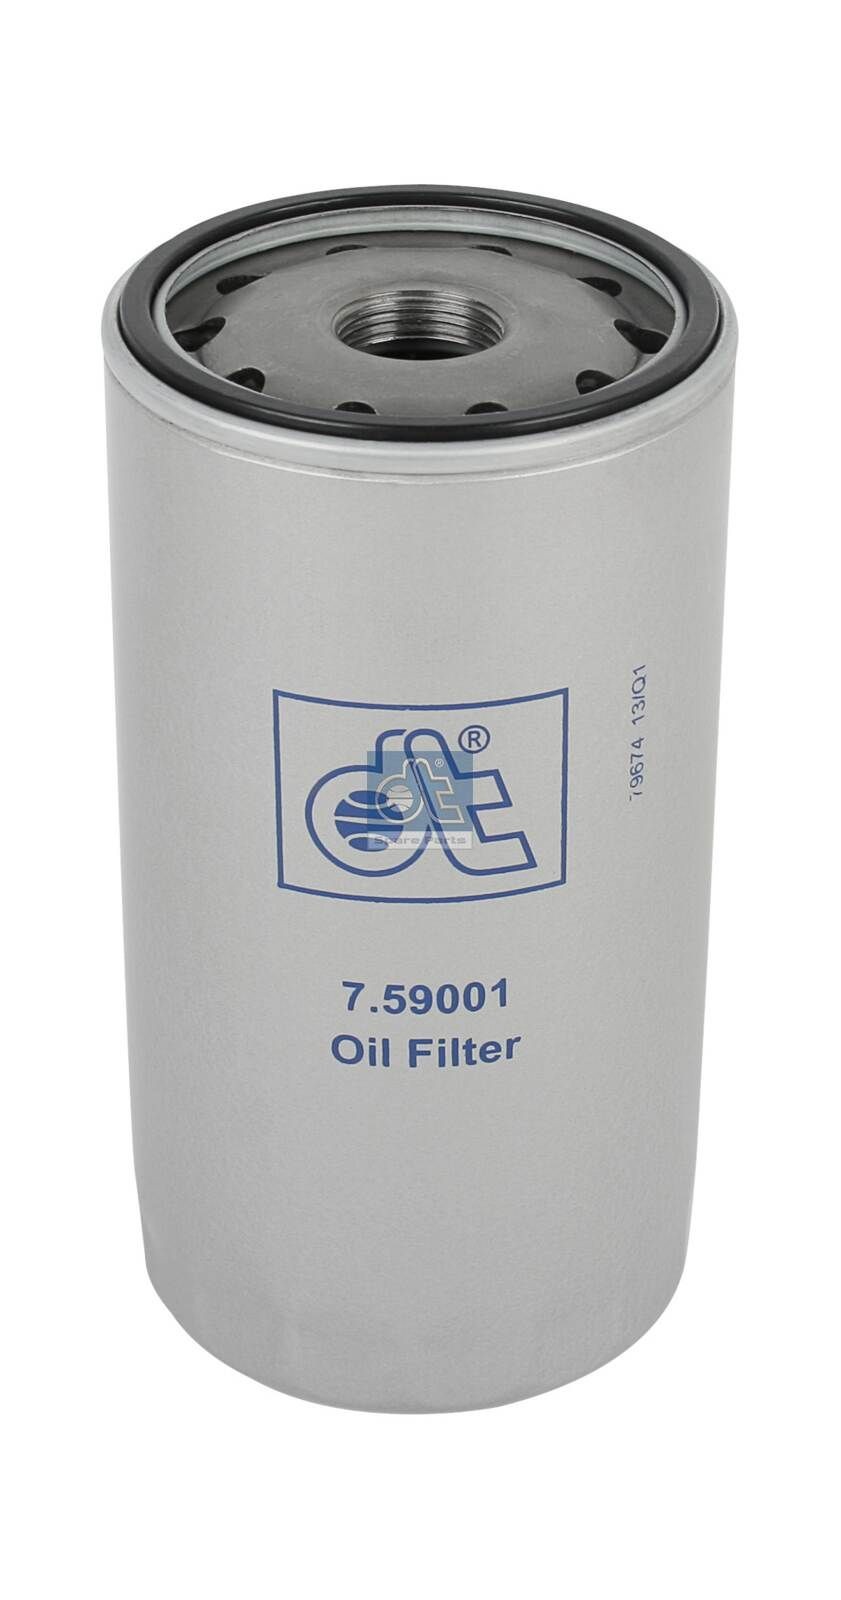 H230W DT Spare Parts 7.59001 Oil filter 193 1099